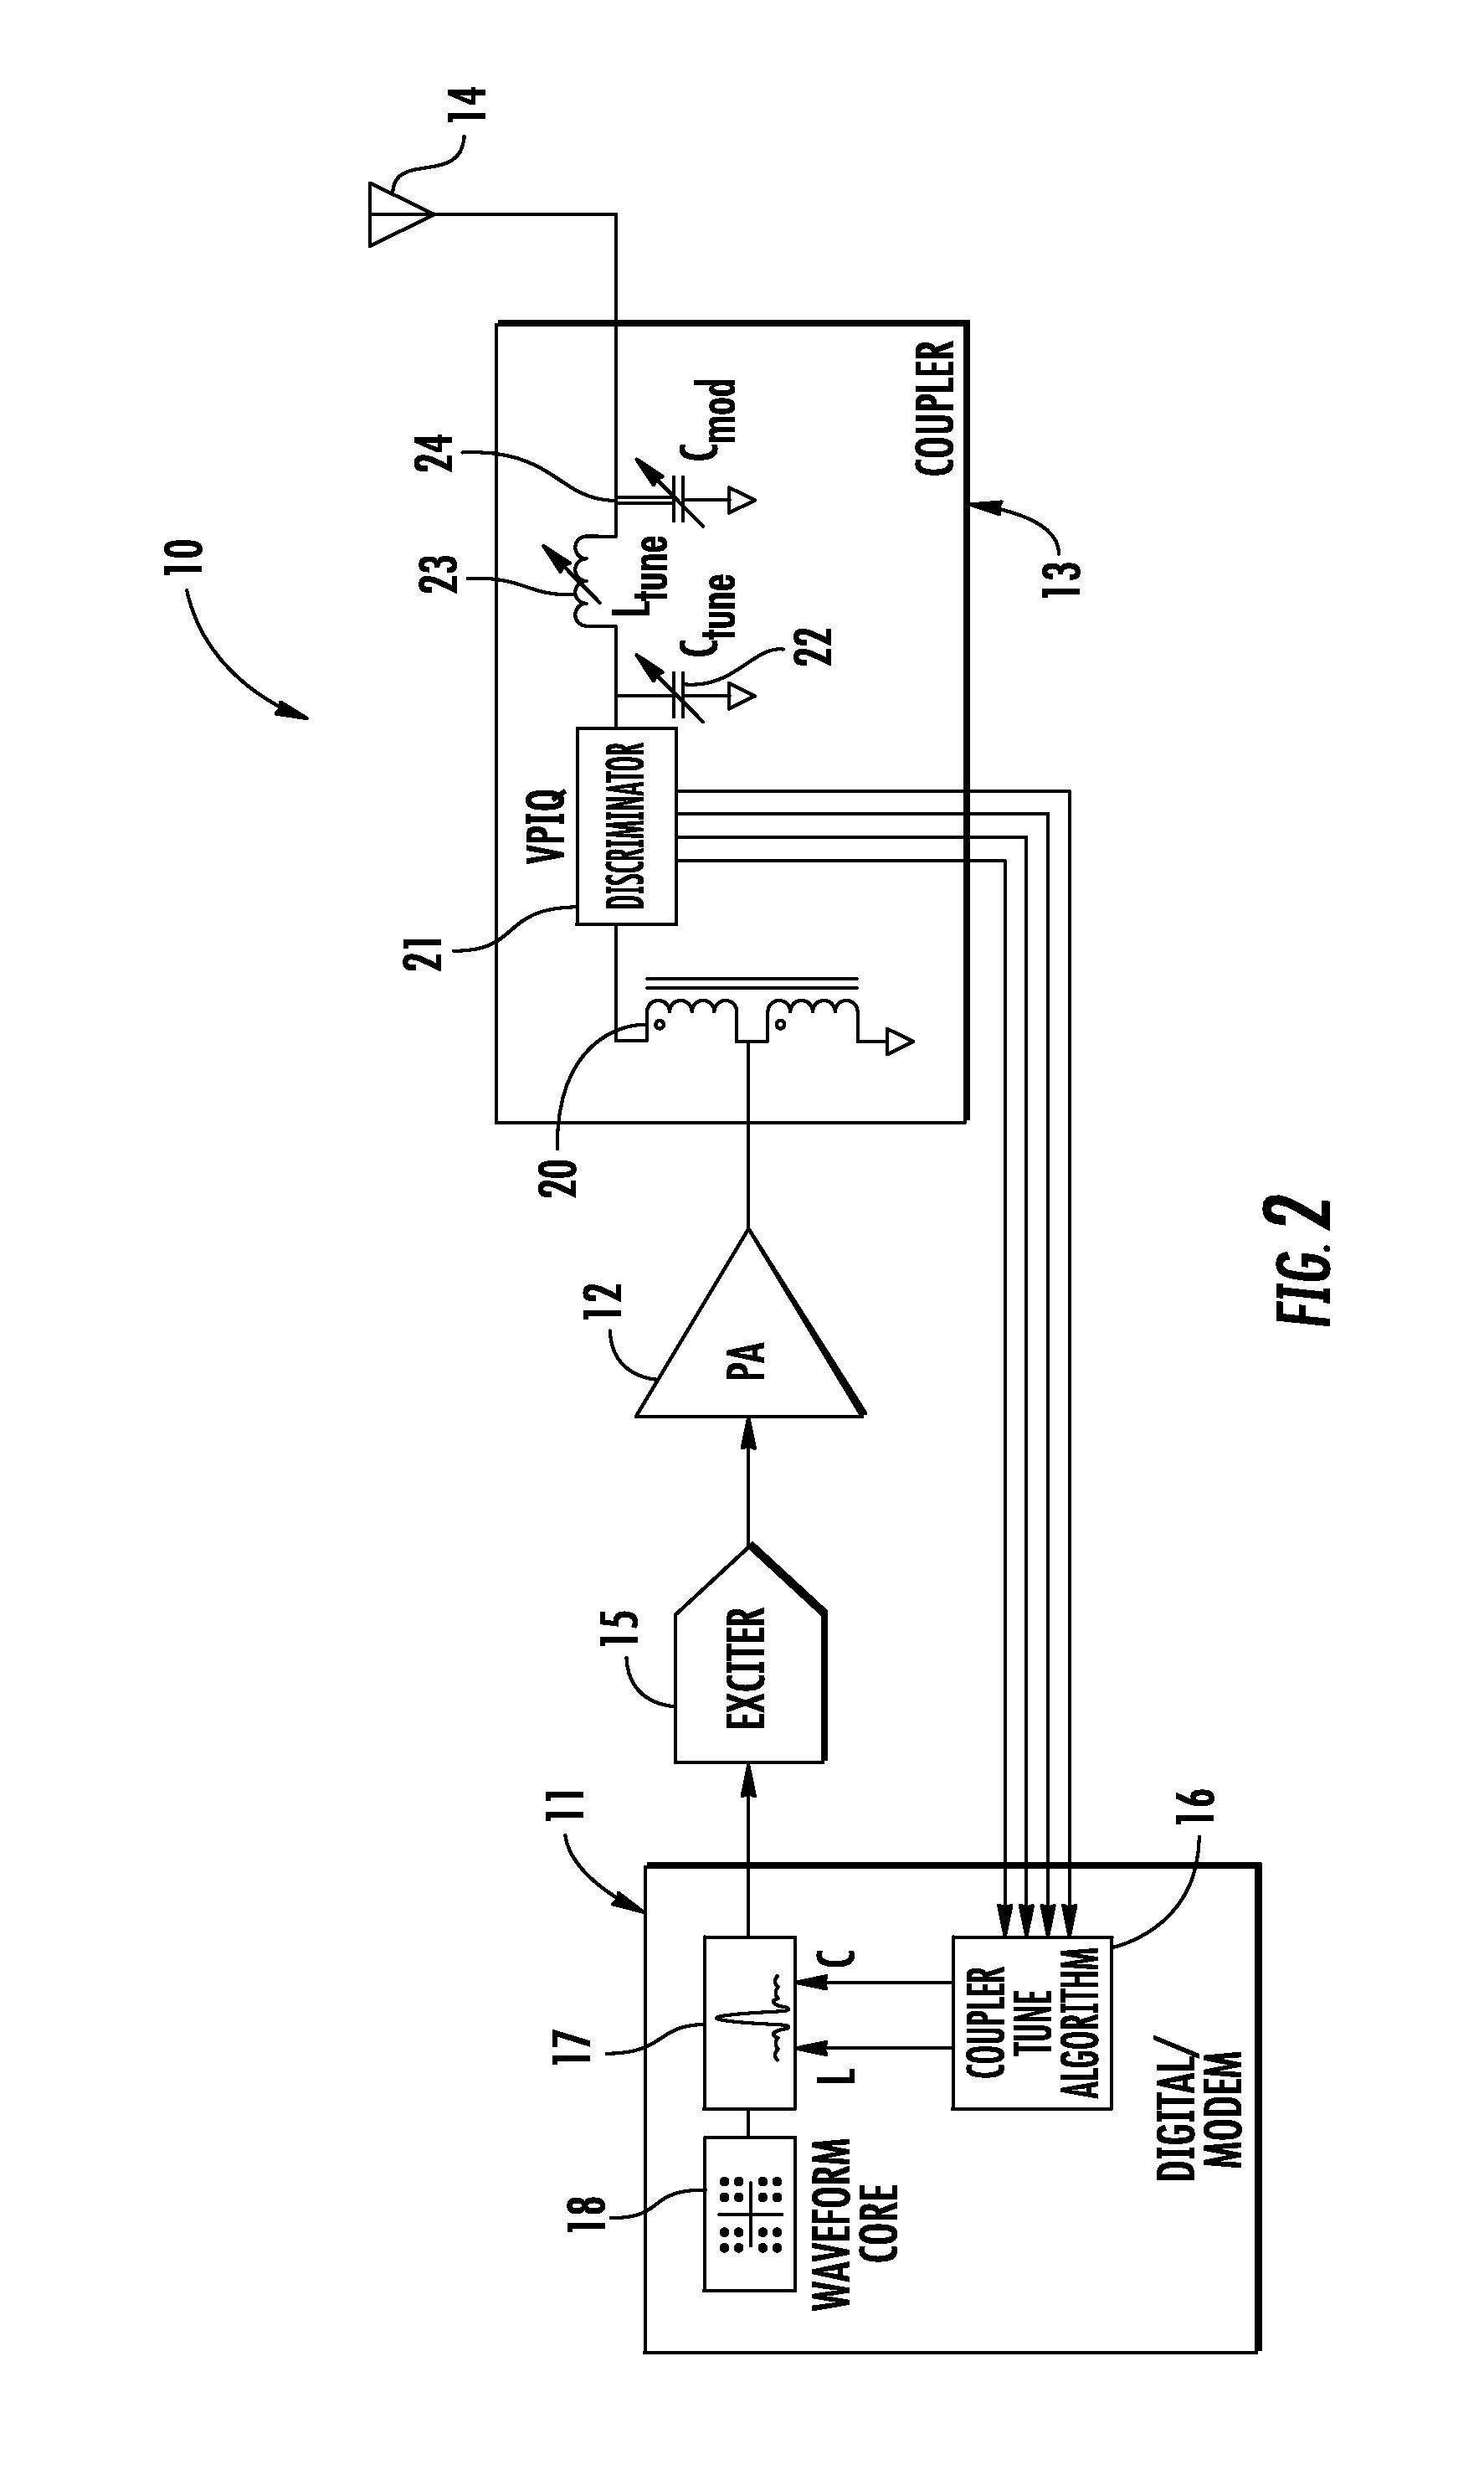 RF communications device with inverse function for coupler therein and related methods